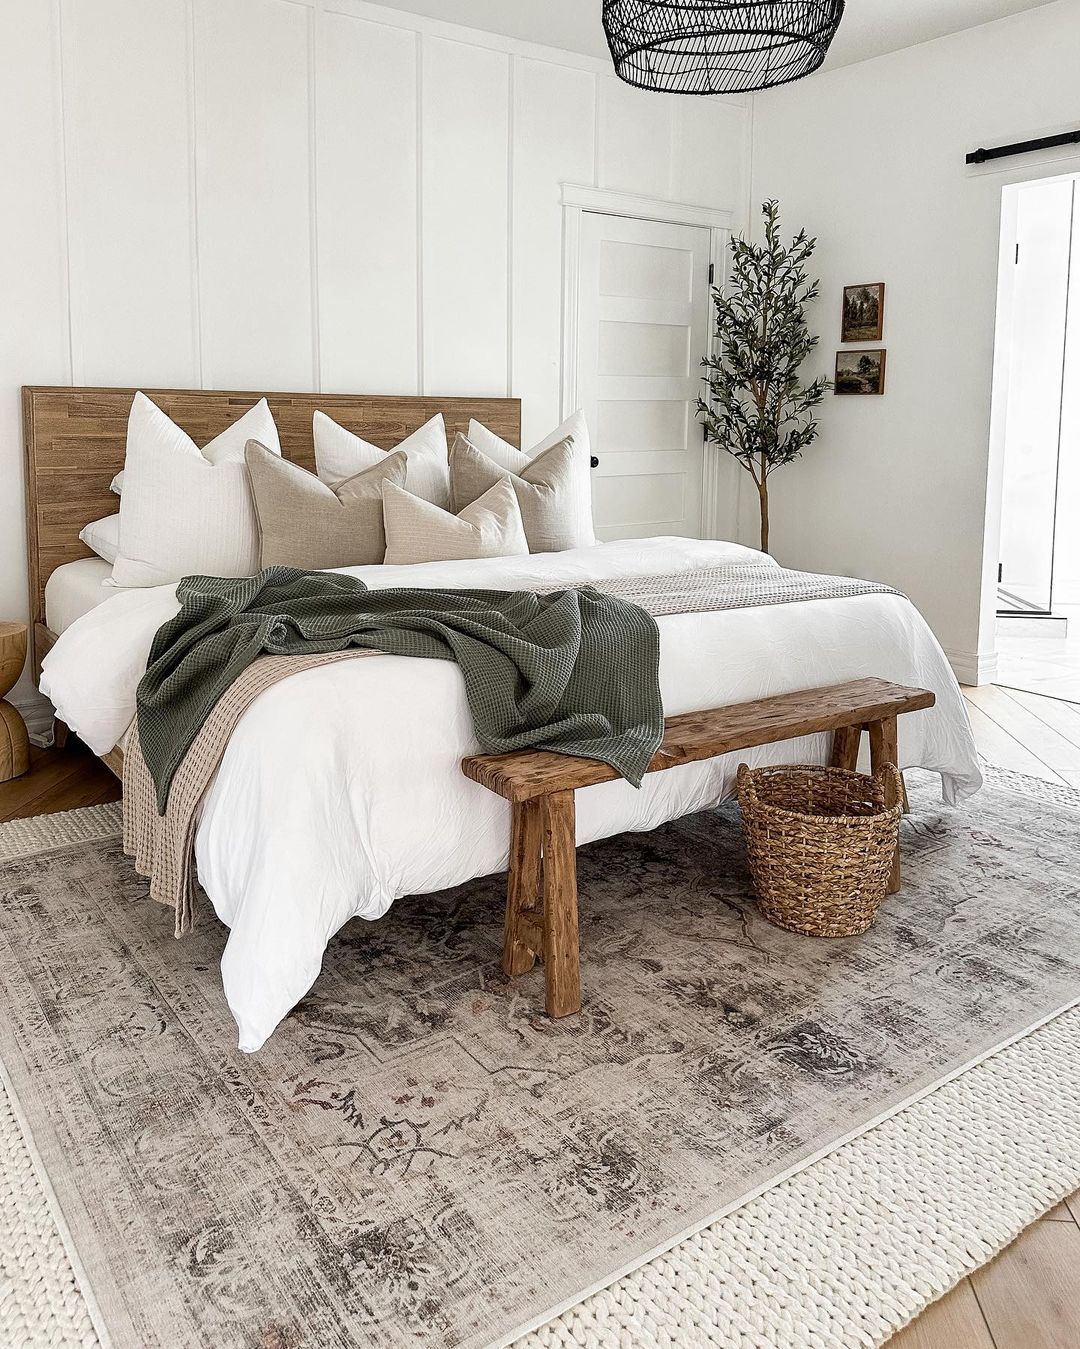 a wooden headboard bed and matching end wooden bench styled on a patterned floor rug in a white painted modern rustic bedroom